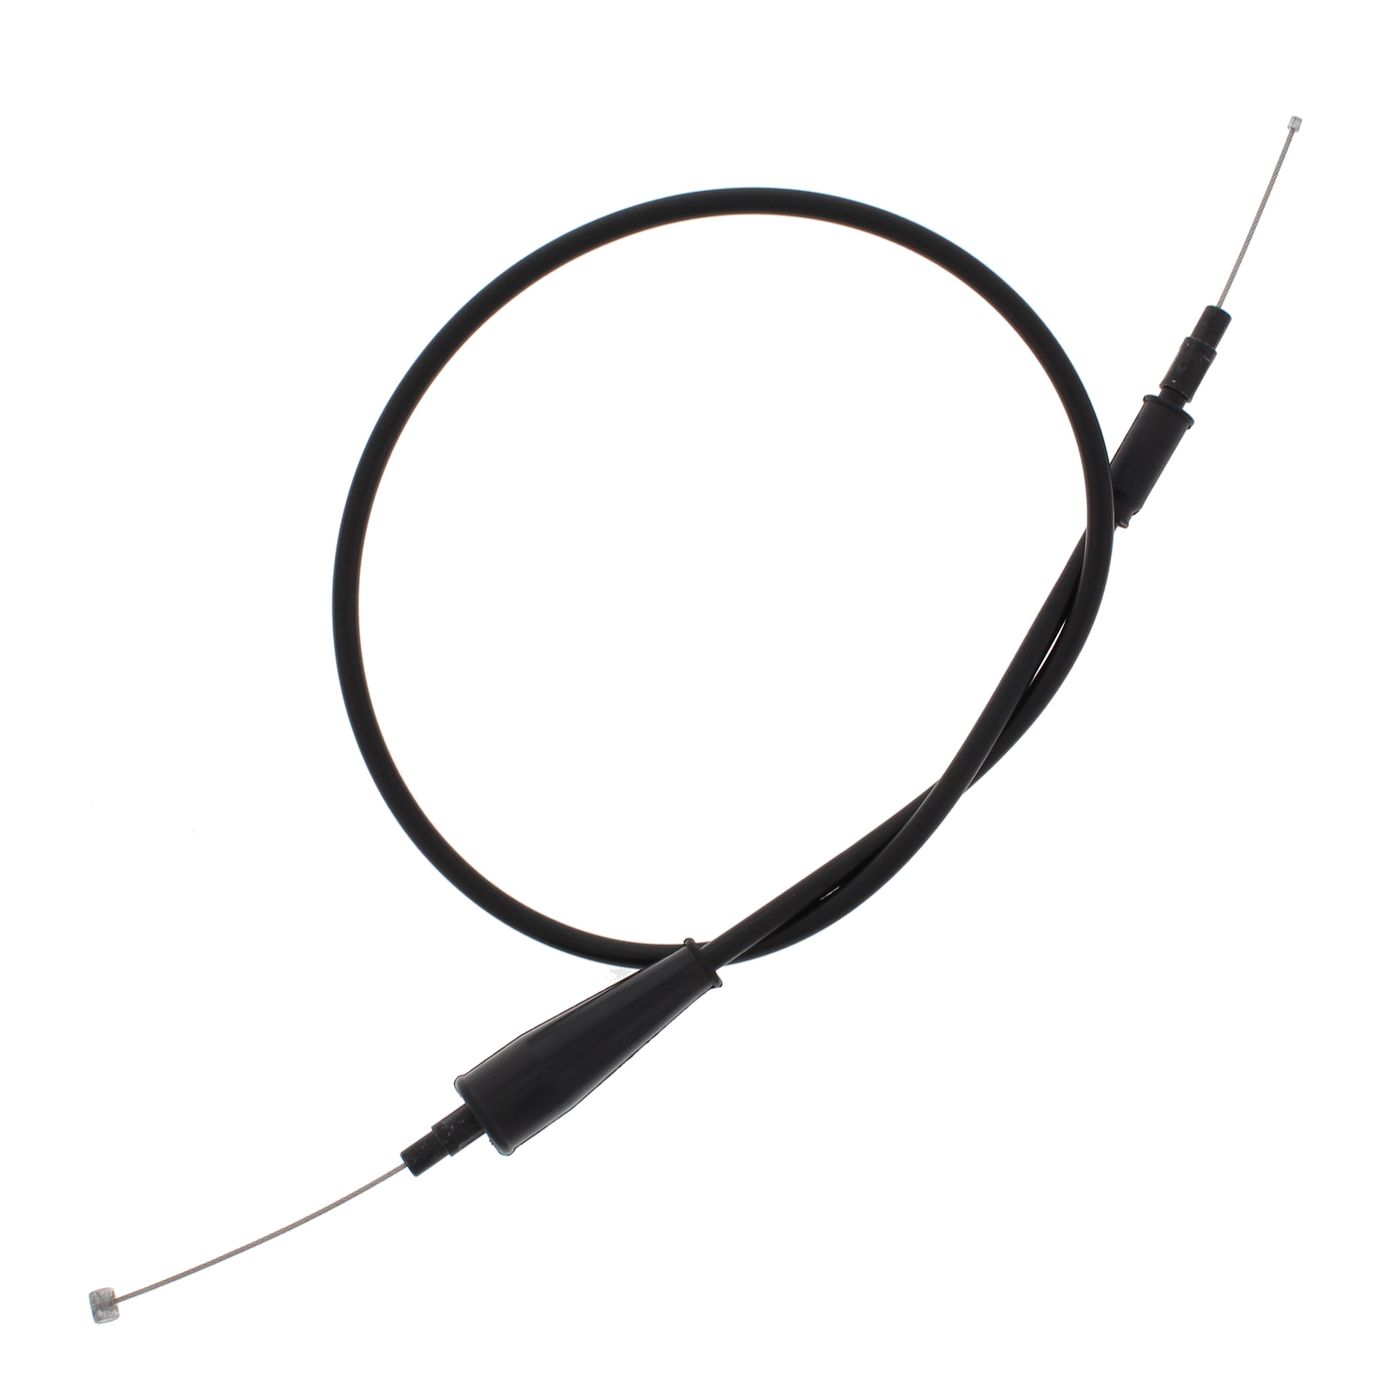 Wrp Throttle Cables - WRP451217 image